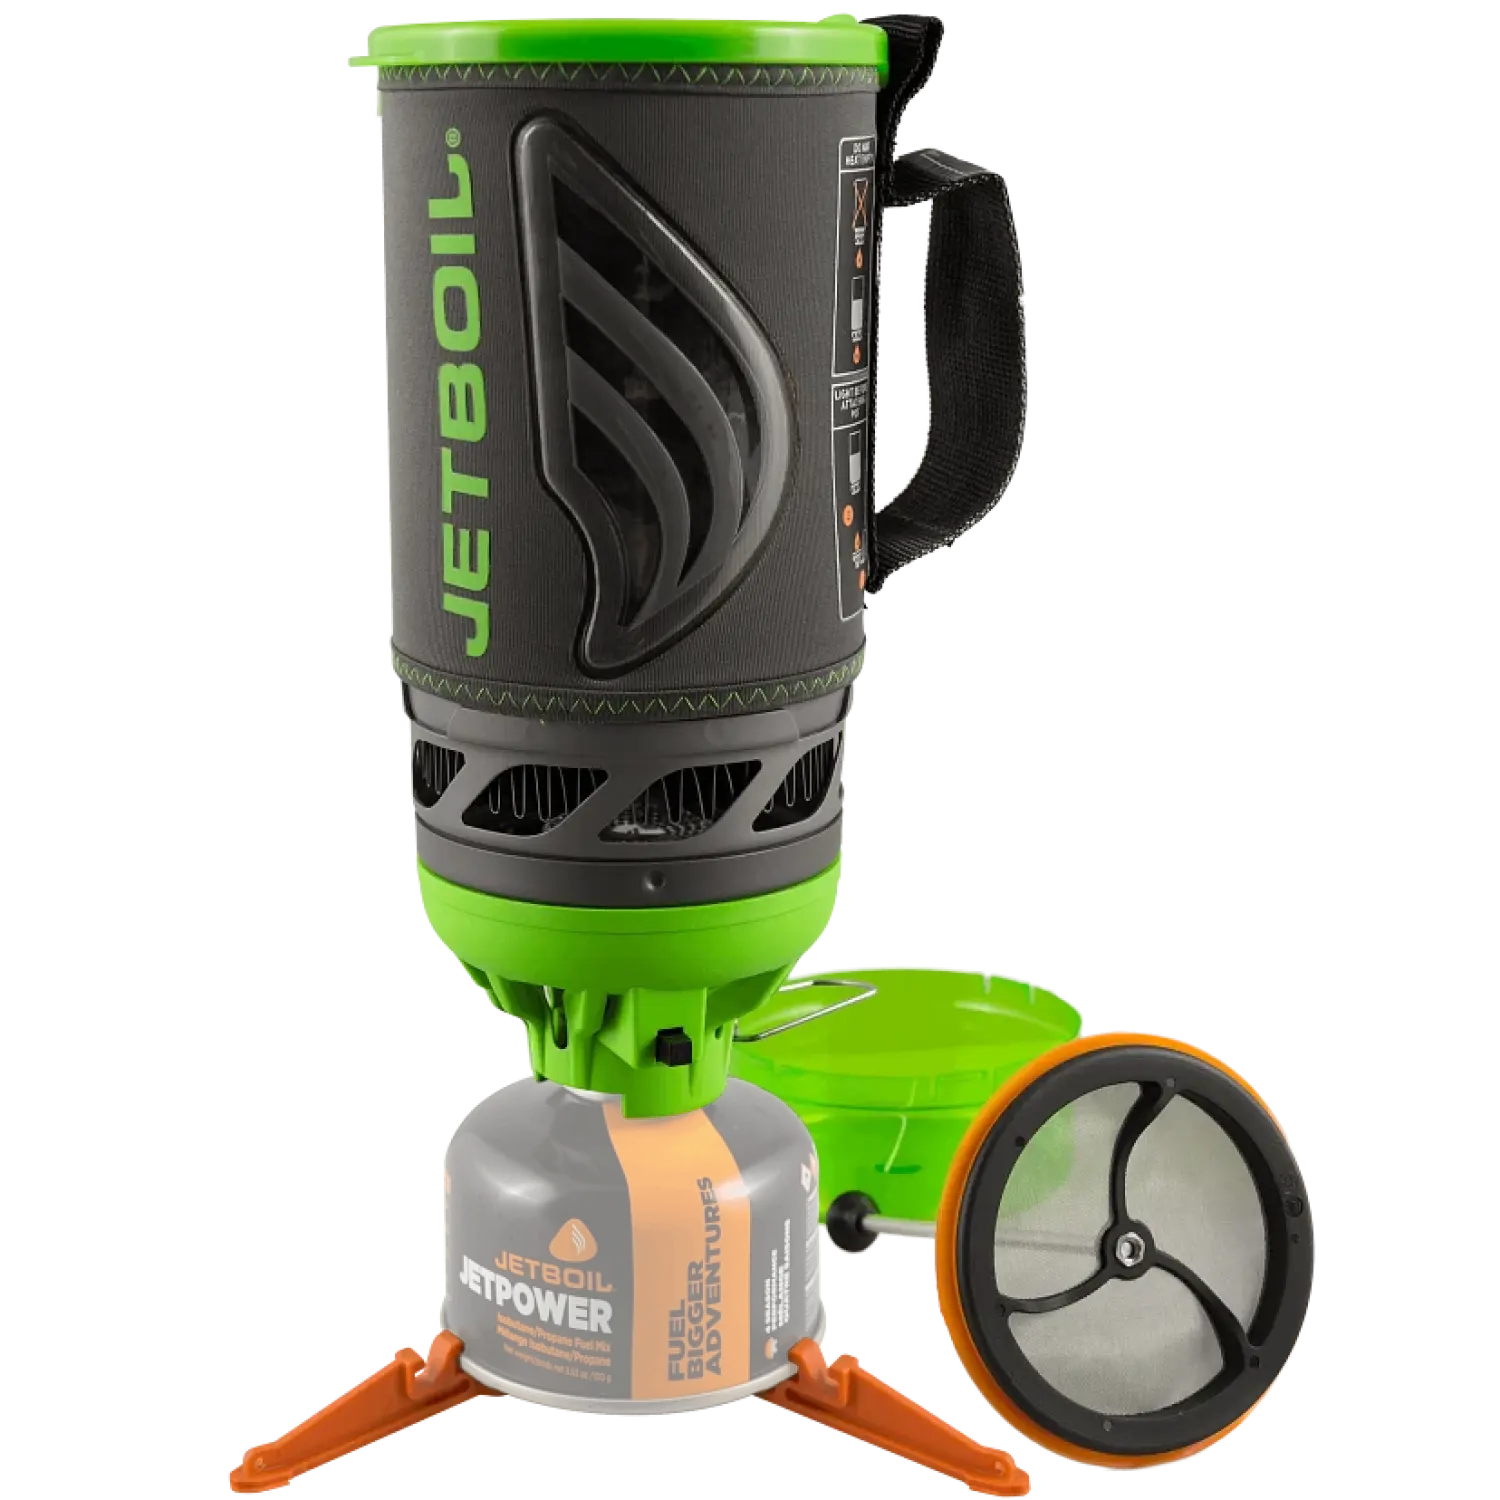 Jetboil Flash Java Kit shown with all compnents (Fuel Cannister not included)